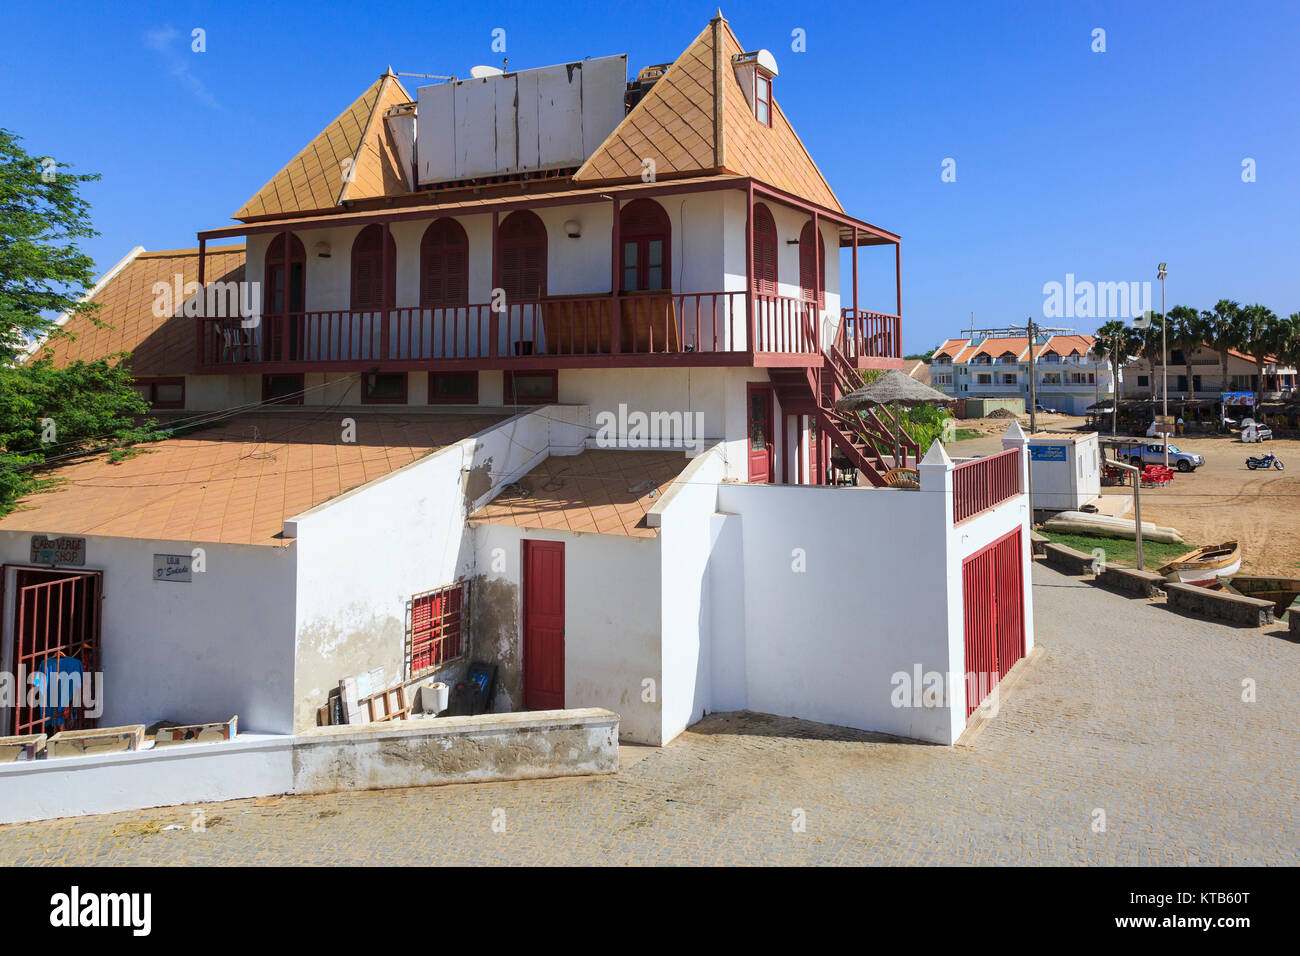 Original lighthouse building which has been converted into houses at the end of the pier at Santa Maria, Sal Island, Cape Verde, Africa Stock Photo